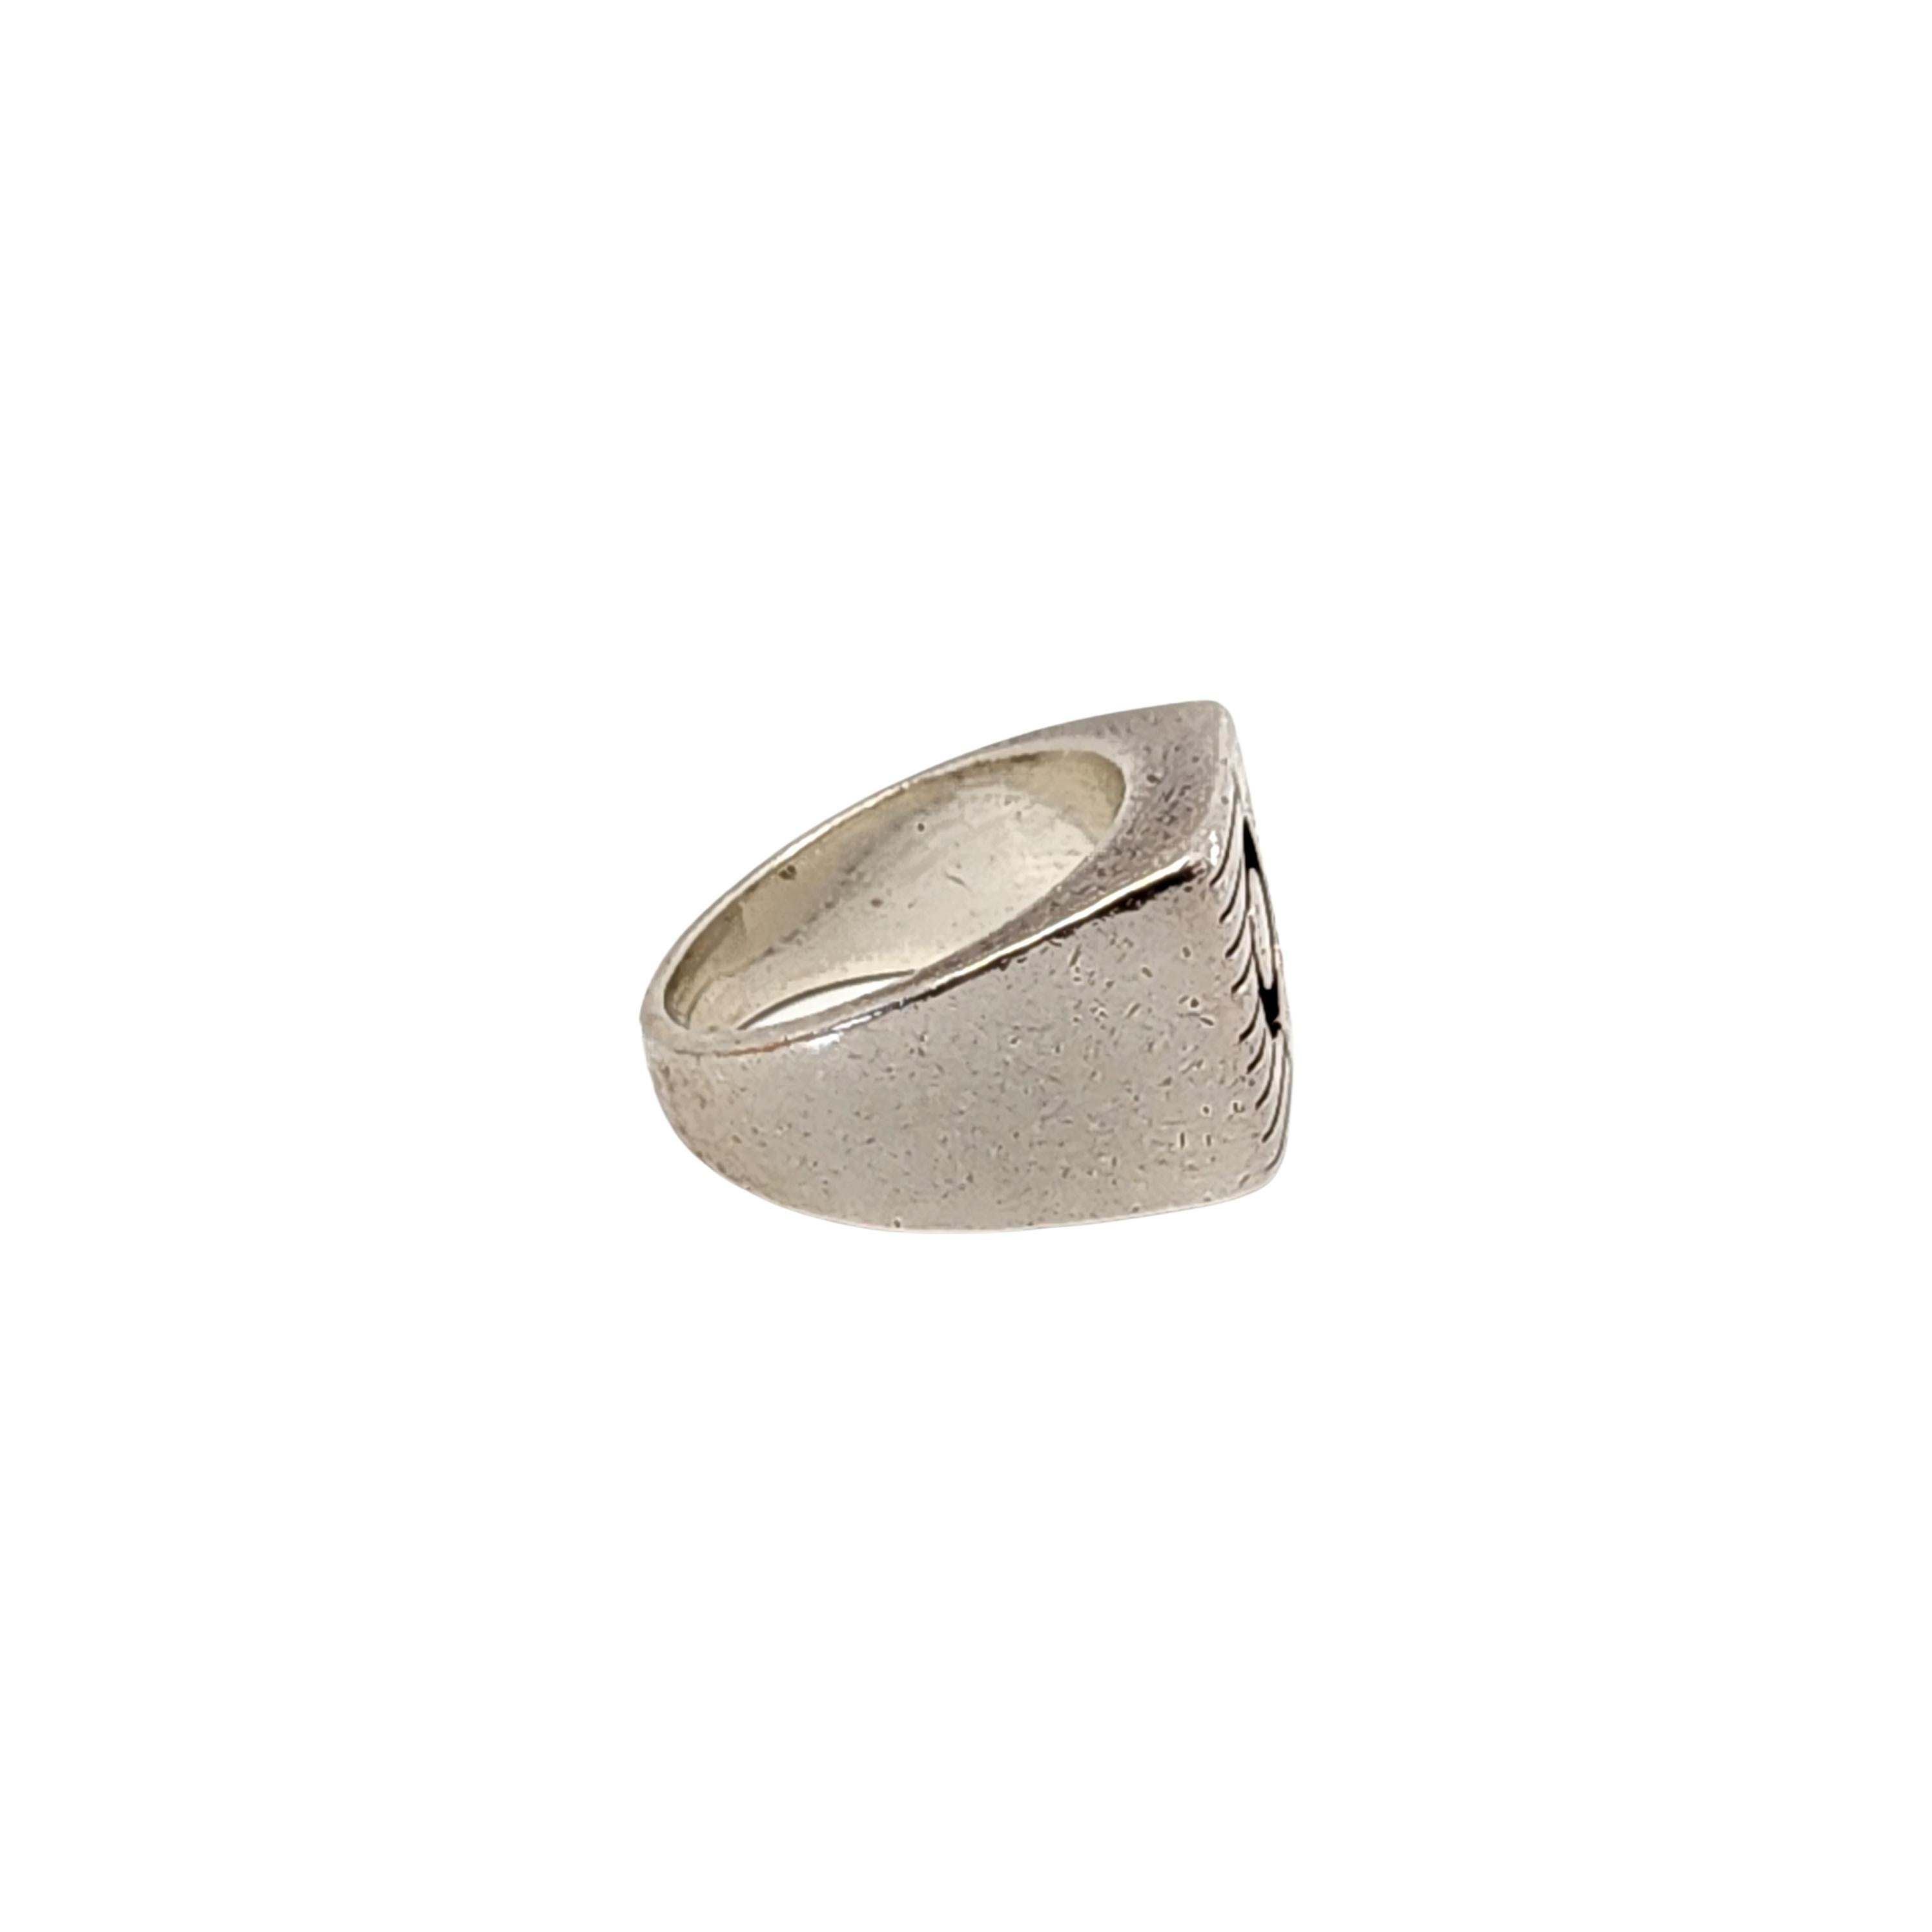 Lisa Jenks Sterling Silver Circle and Stripes Ring, Size 6 1/2 #14181 In Good Condition For Sale In Washington Depot, CT